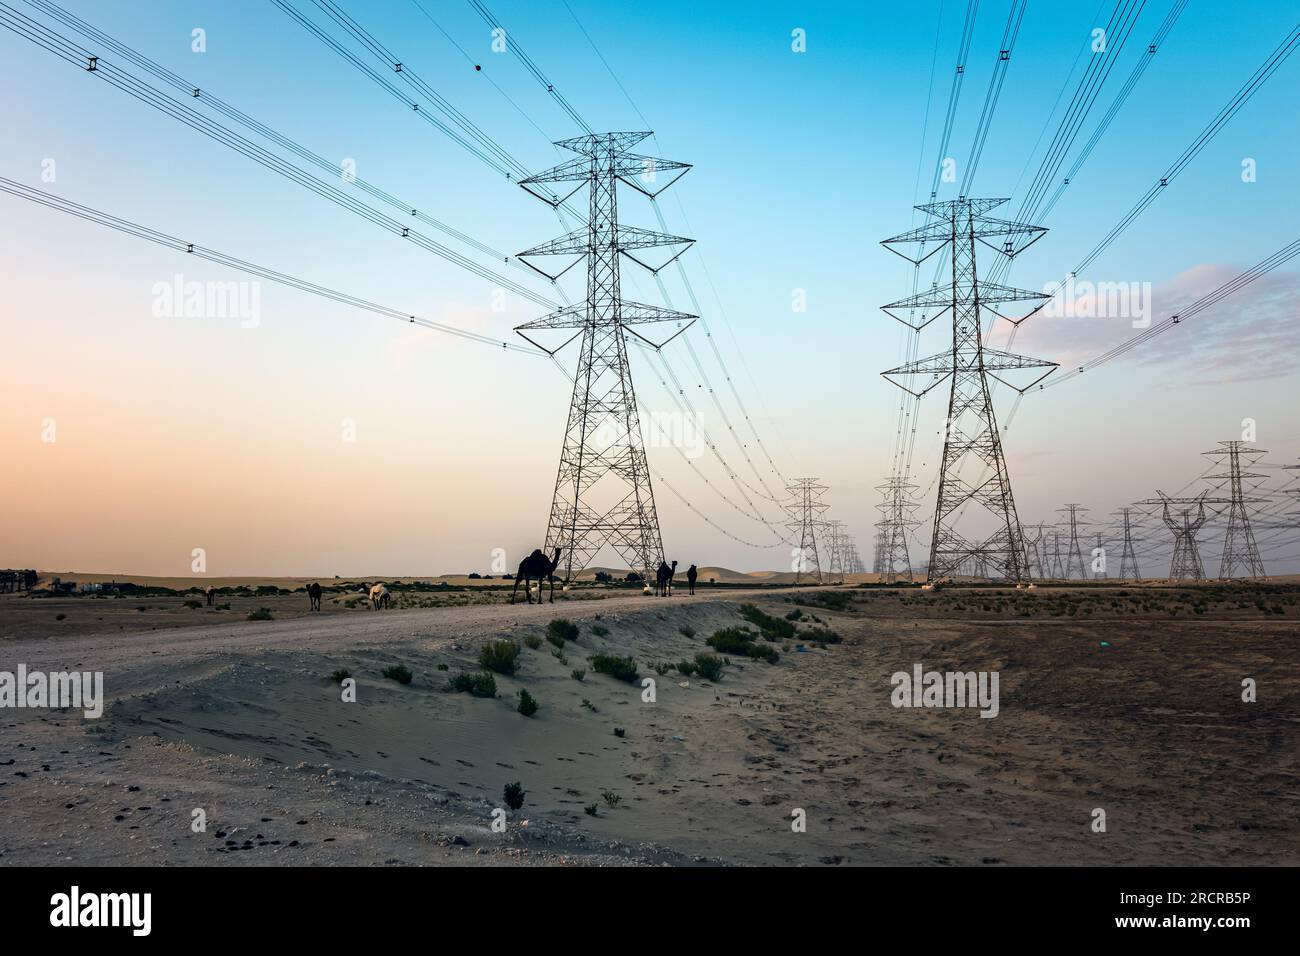 High Voltage an electric tower in sunset time near Al Hofuf Desert - Saudi Arabia. Stock Photo